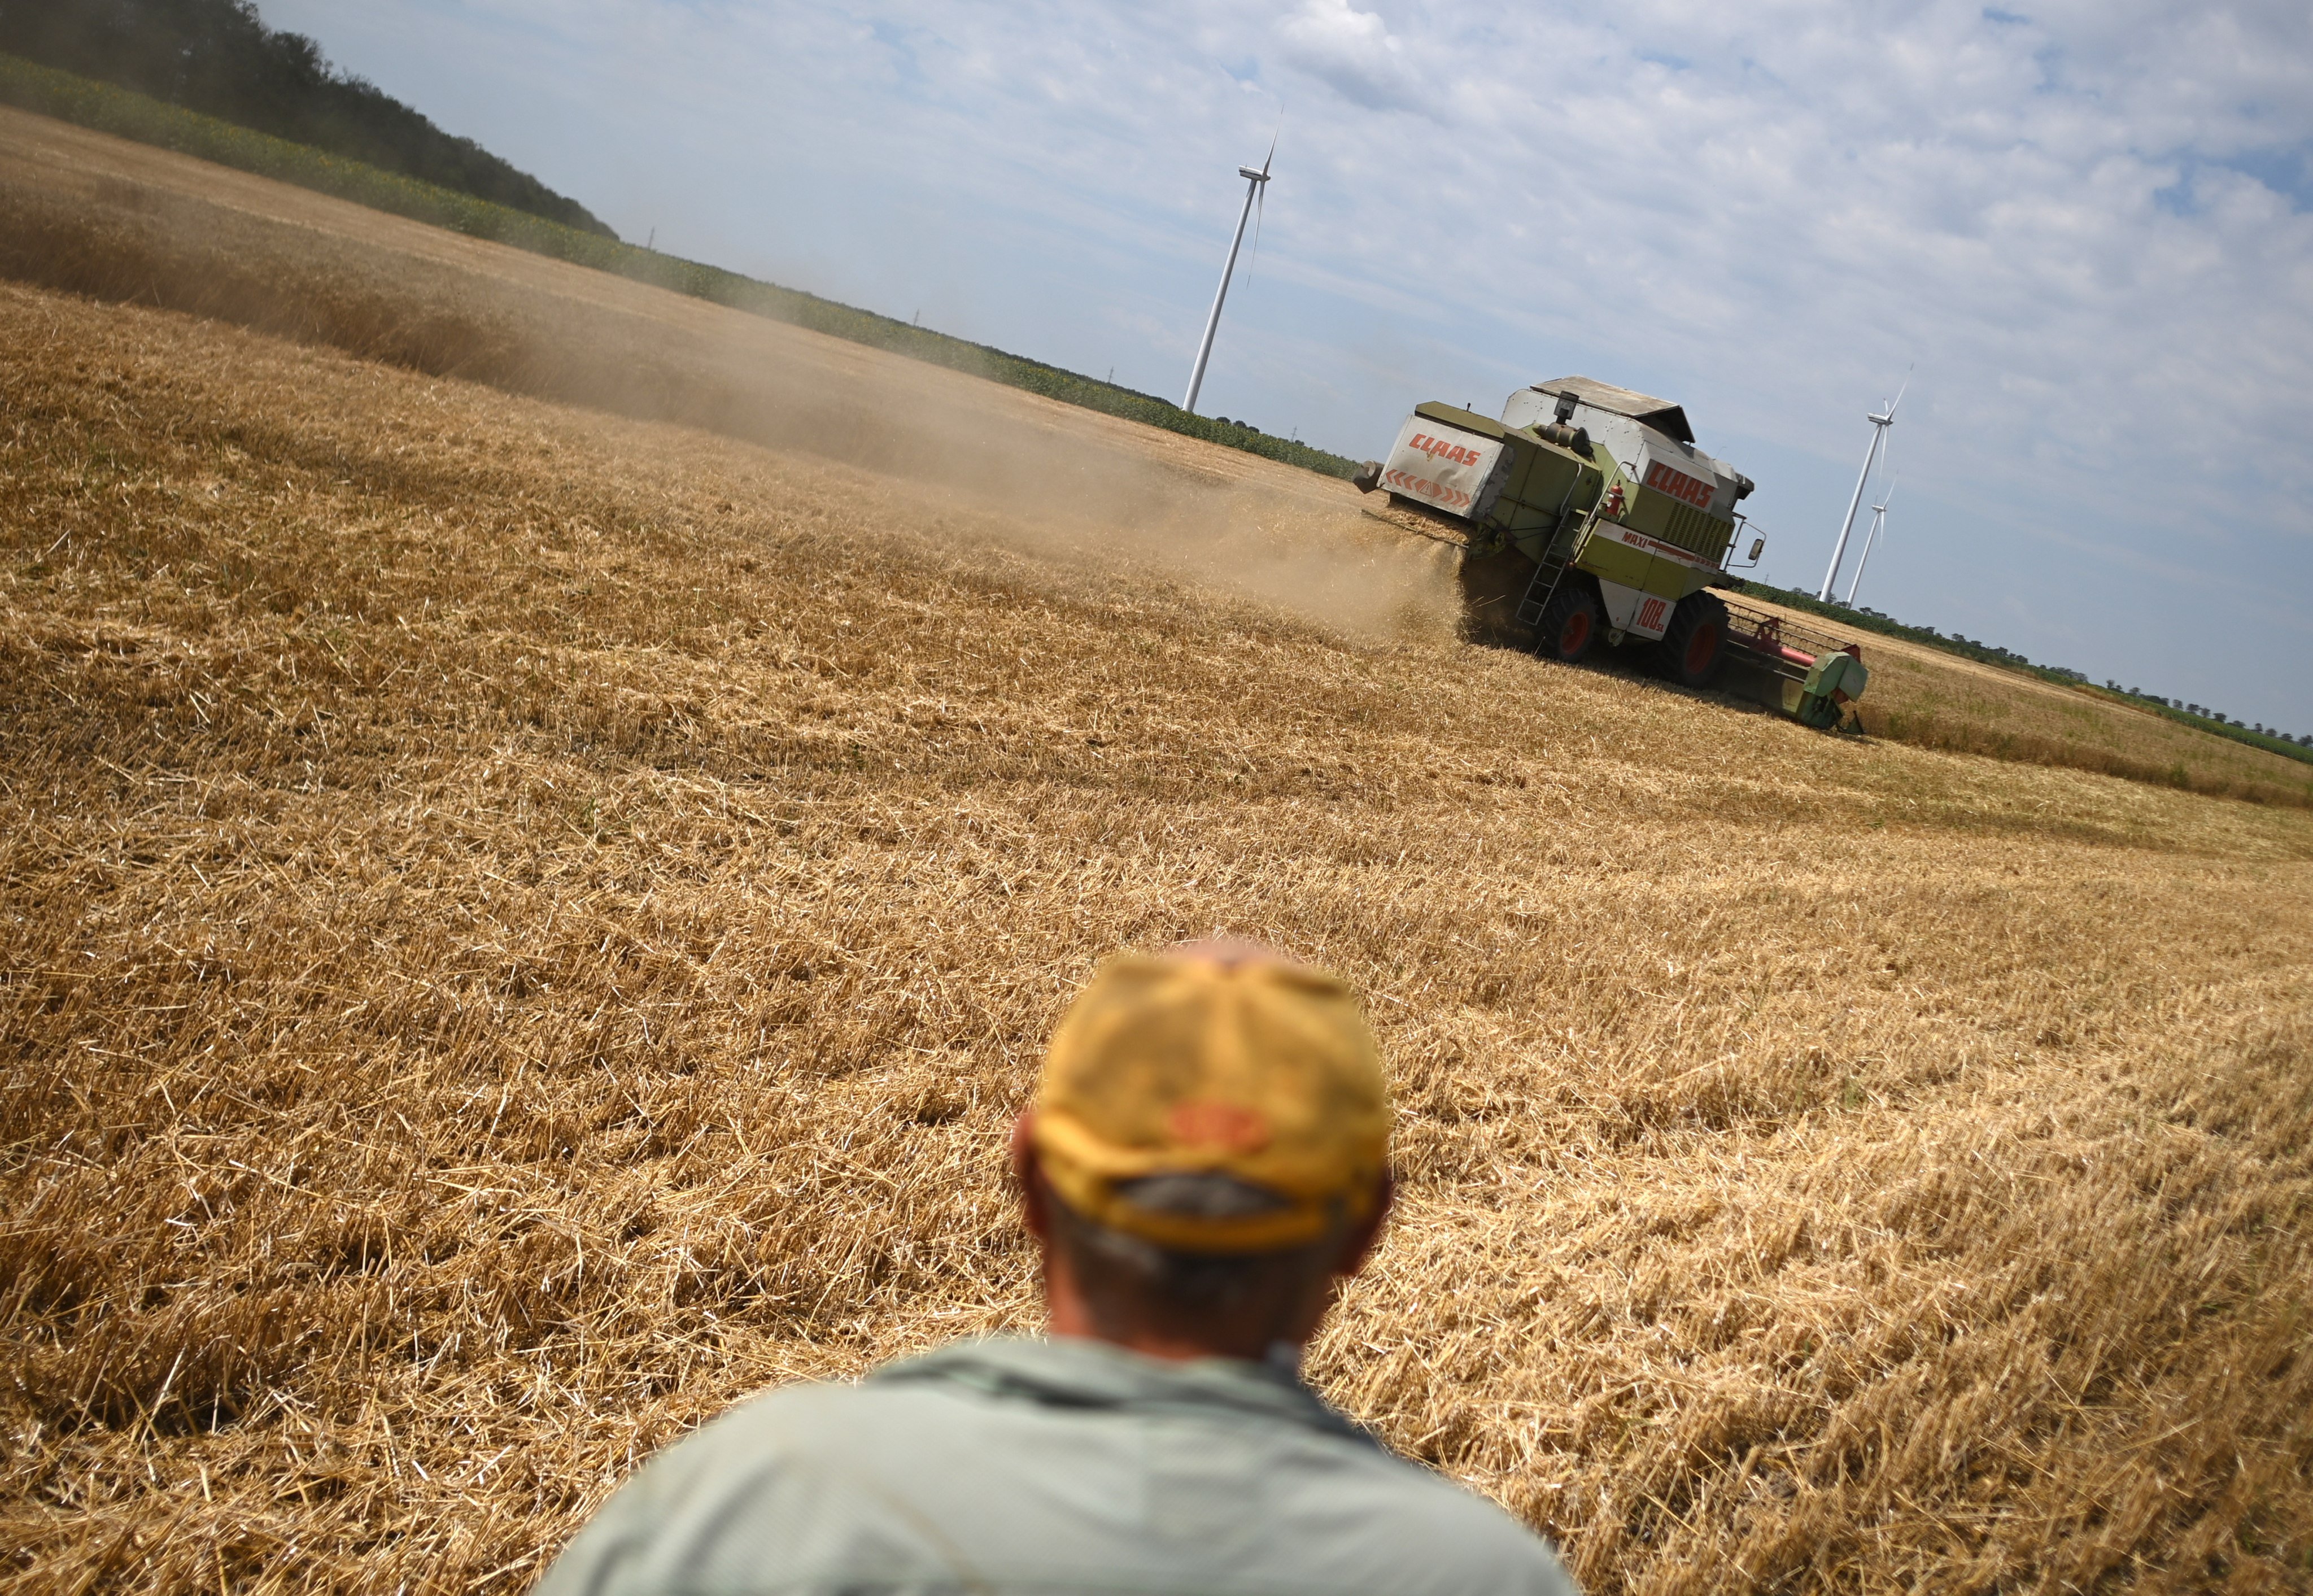 The United Nations and Turkey brokered the Black Sea Grain Initiative with Russia and Ukraine in July 2022 to help alleviate a global food crisis worsened by Moscow’s invasion and blockade of Ukrainian ports. Photo: EPA-EFE